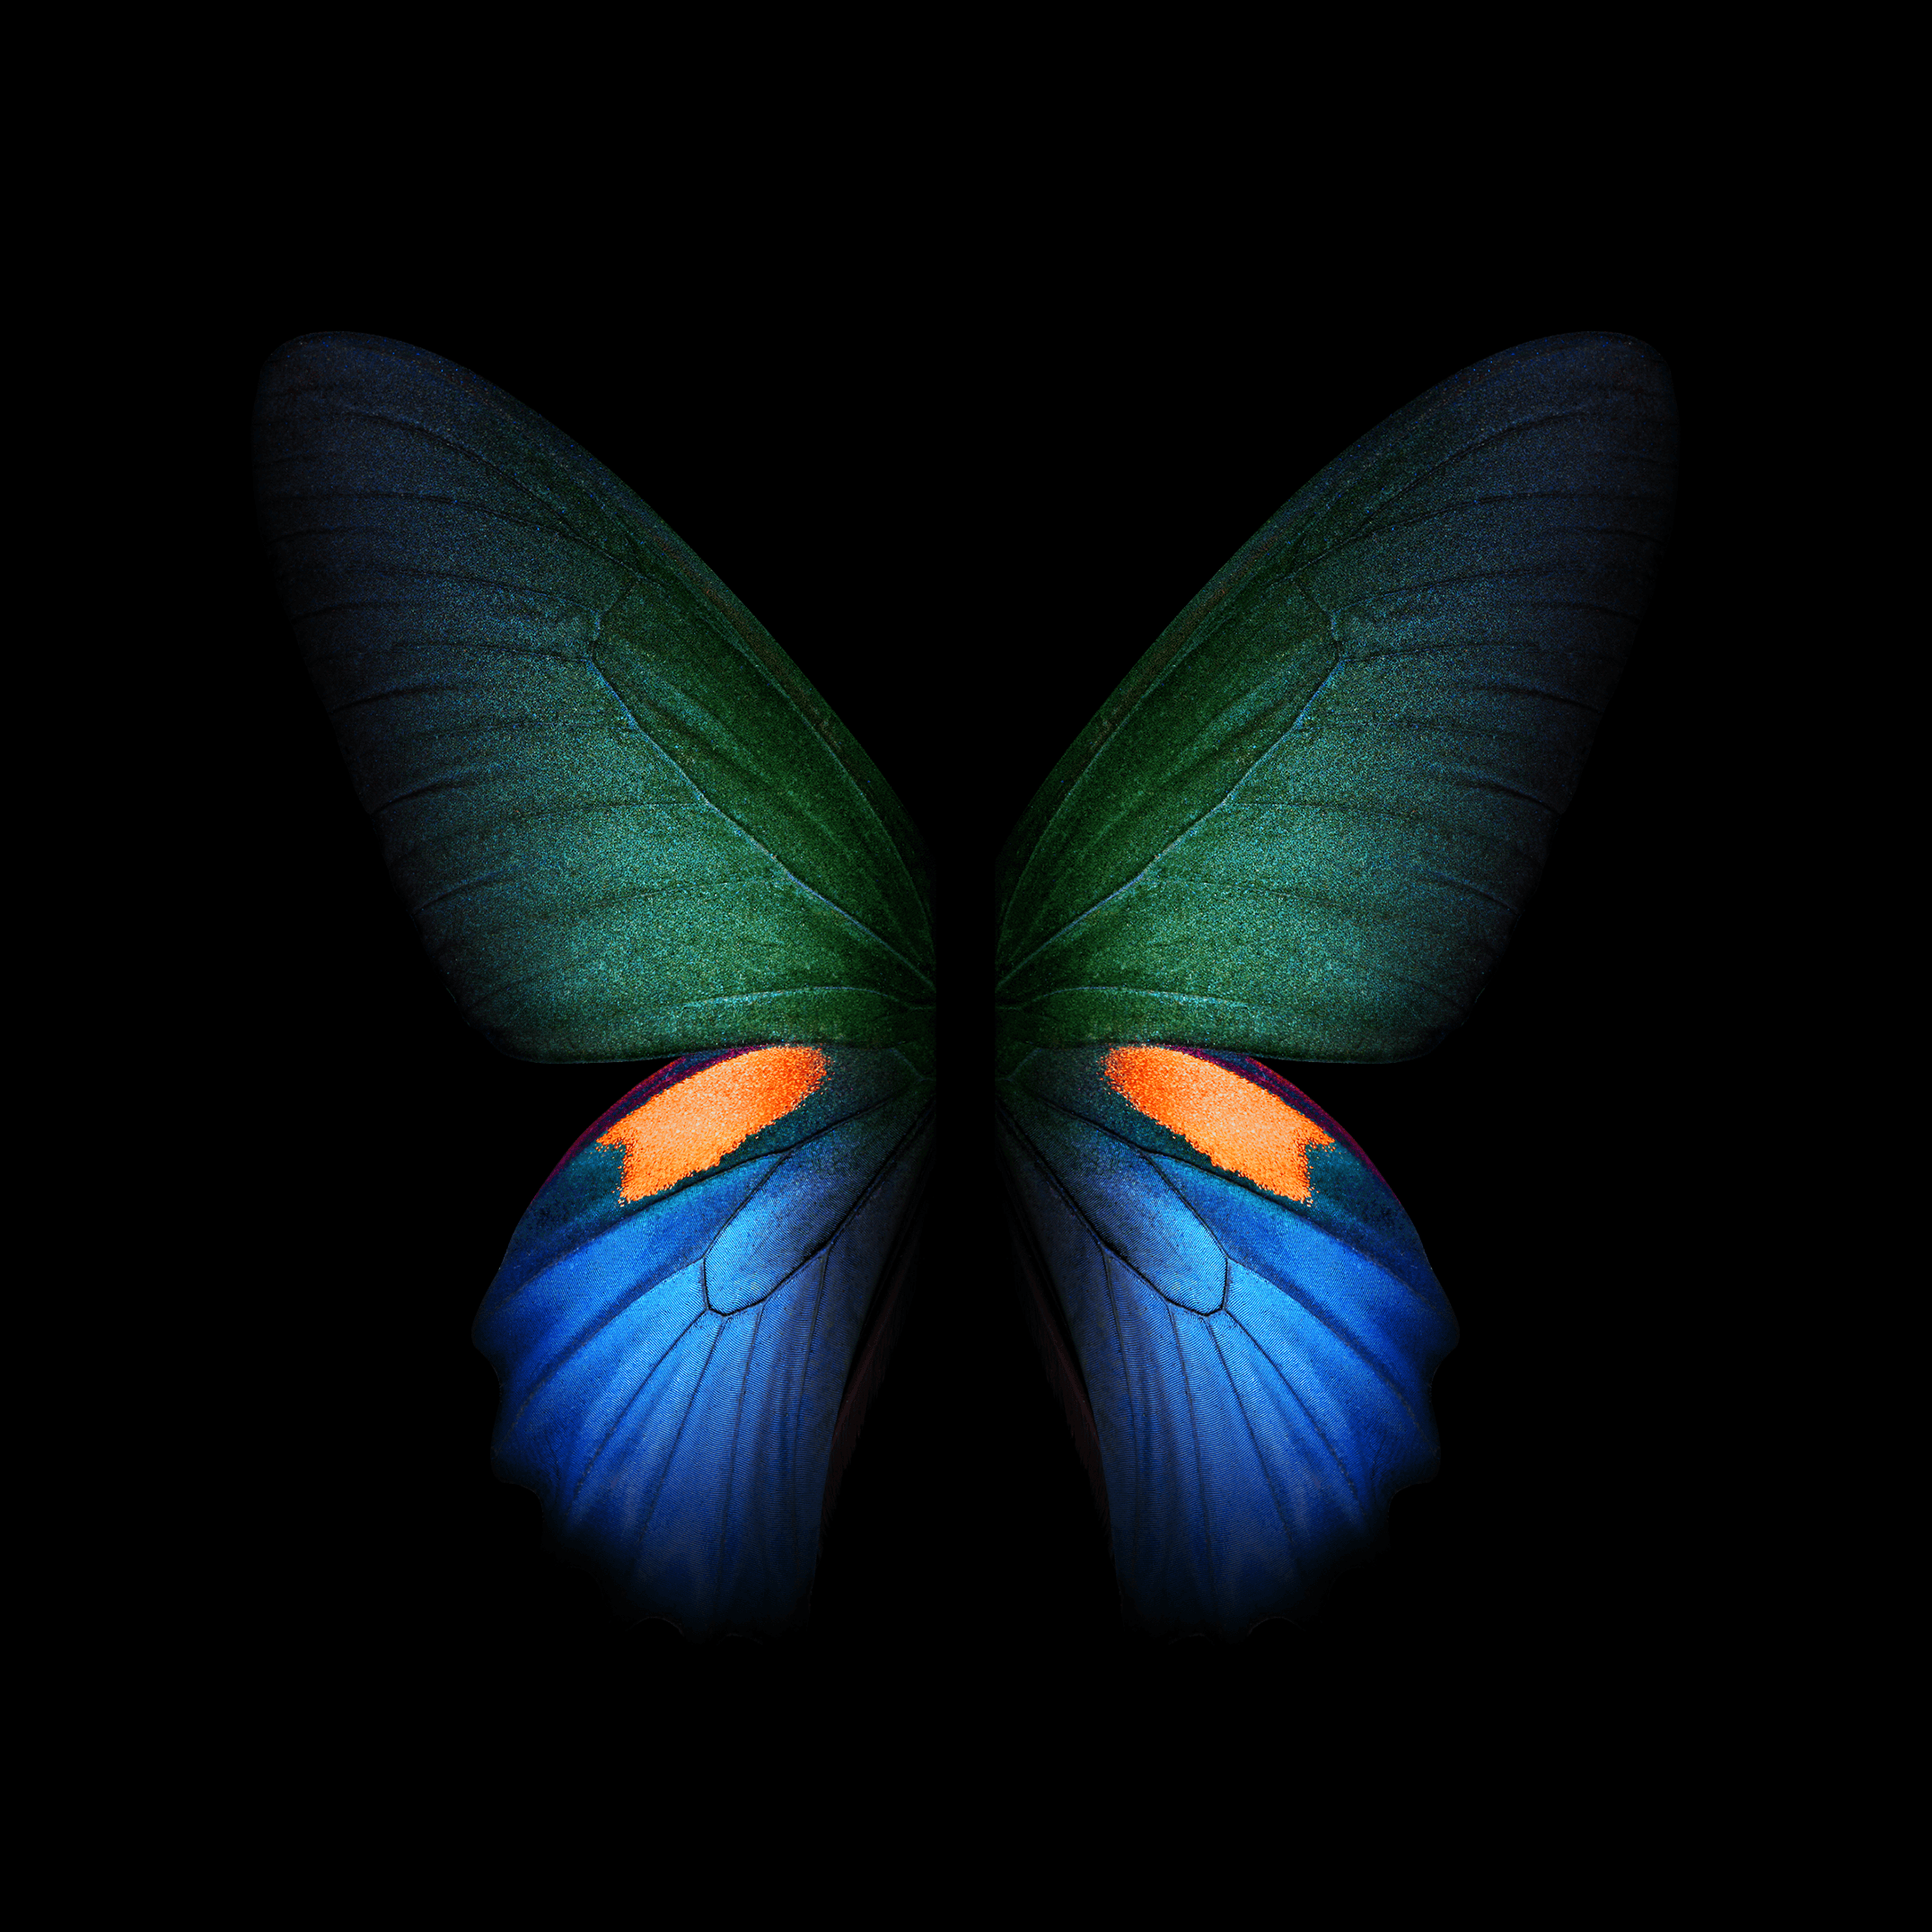 Download Samsung Galaxy Fold Wallpaper In High Quality!